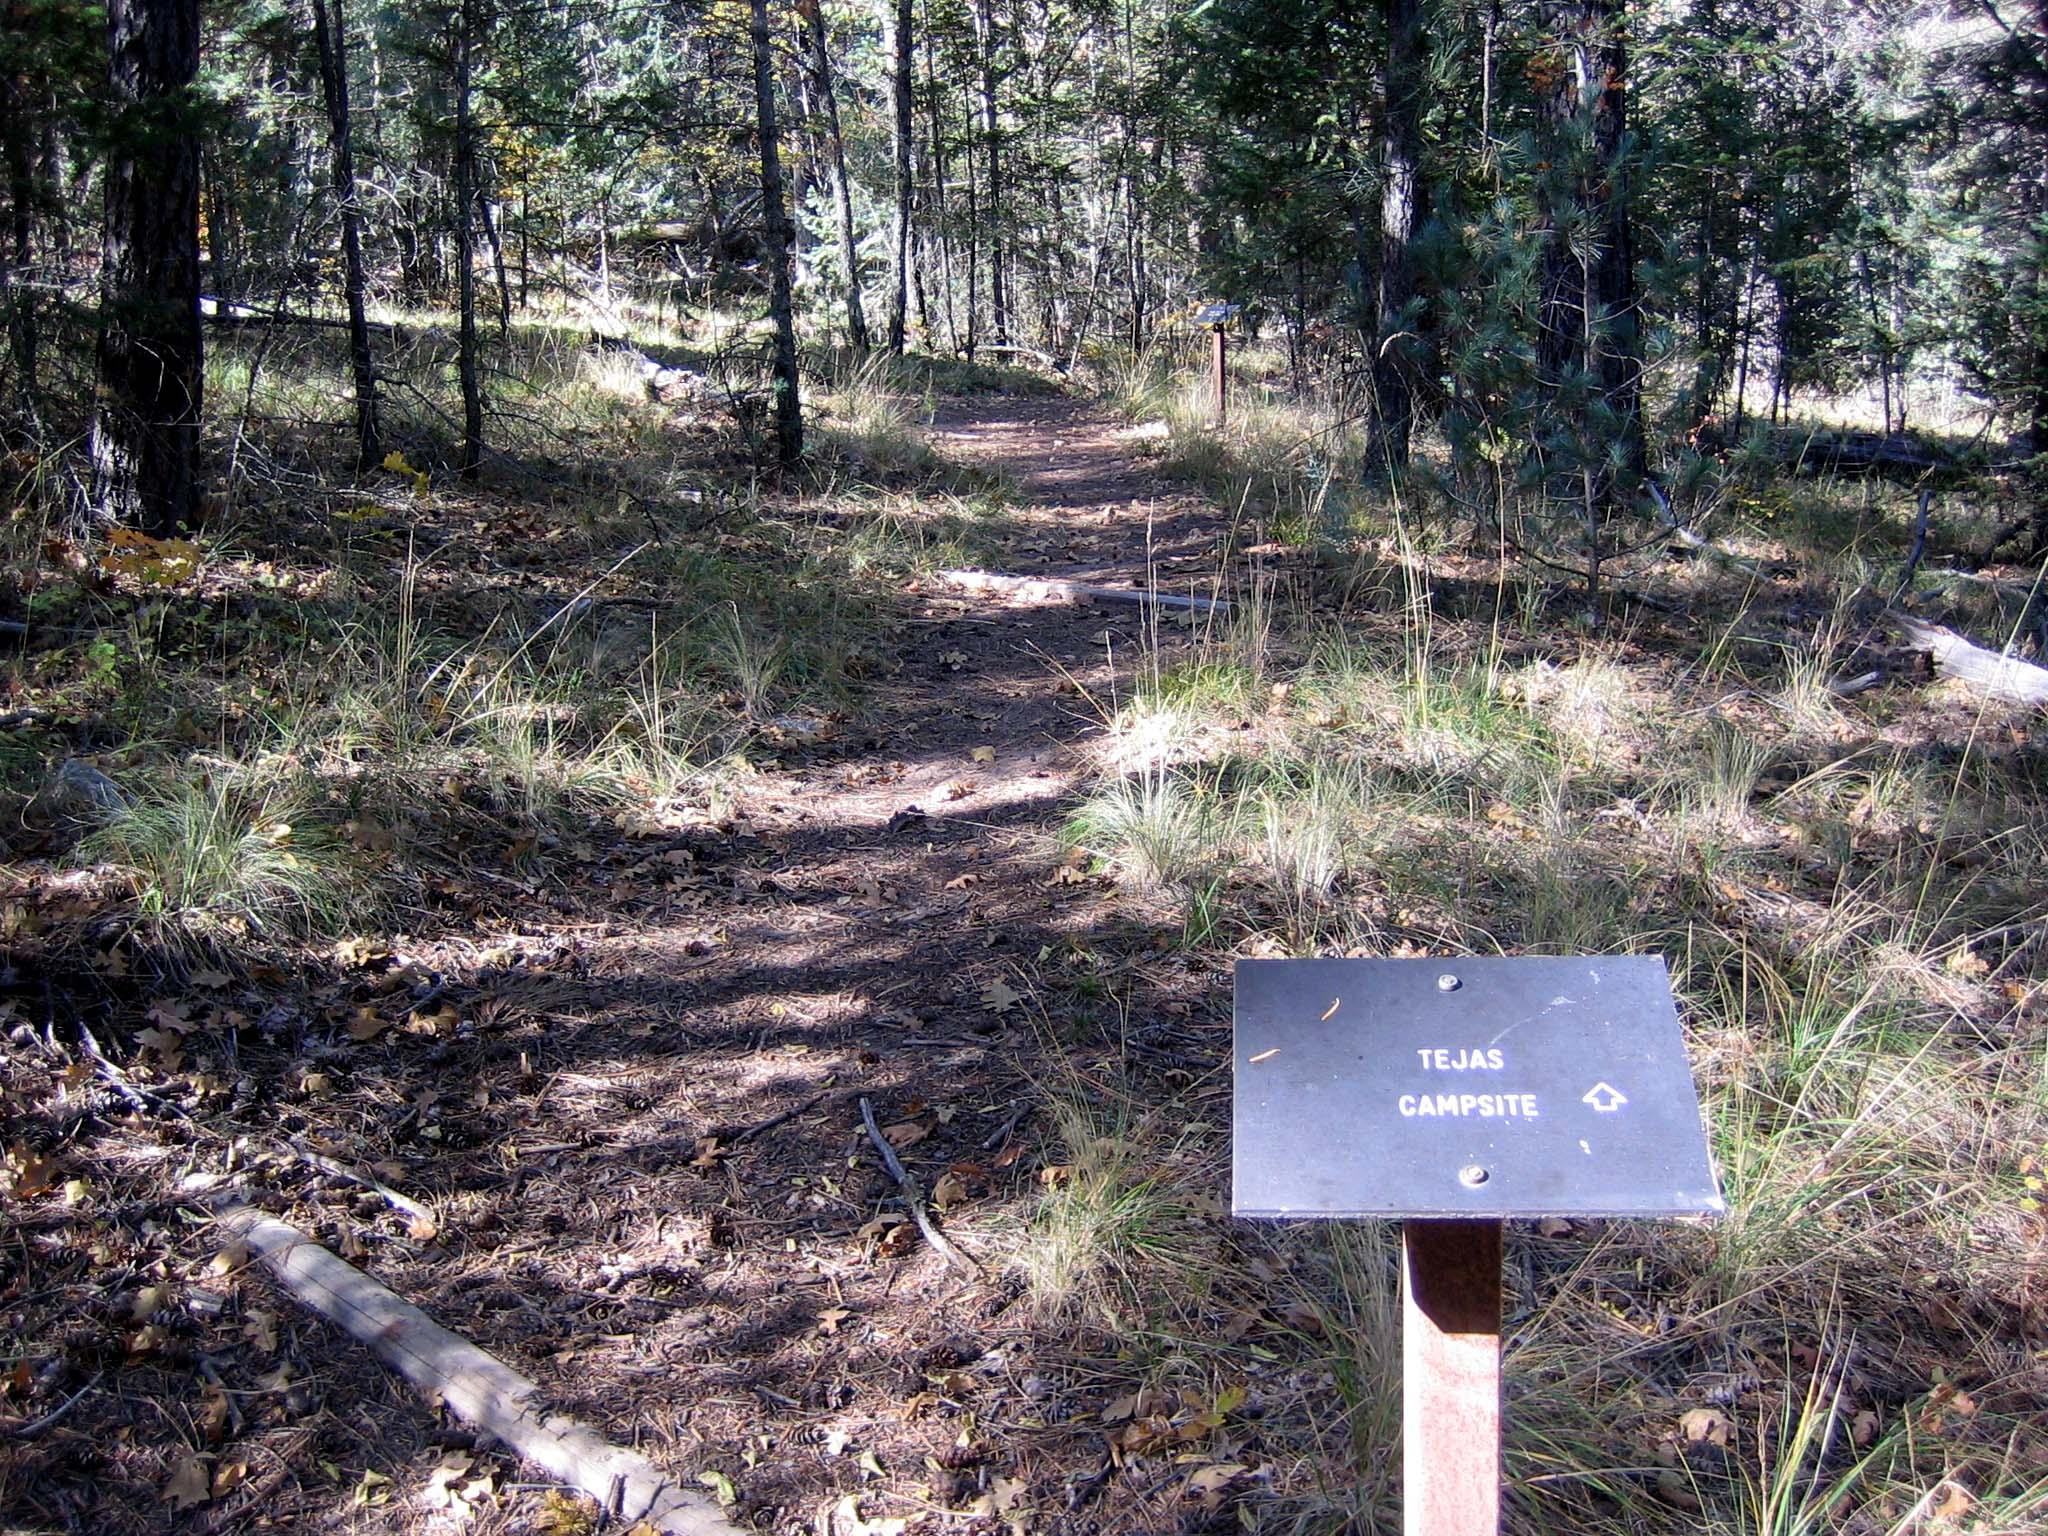 A metal sign directs hikers to the Tejas campground